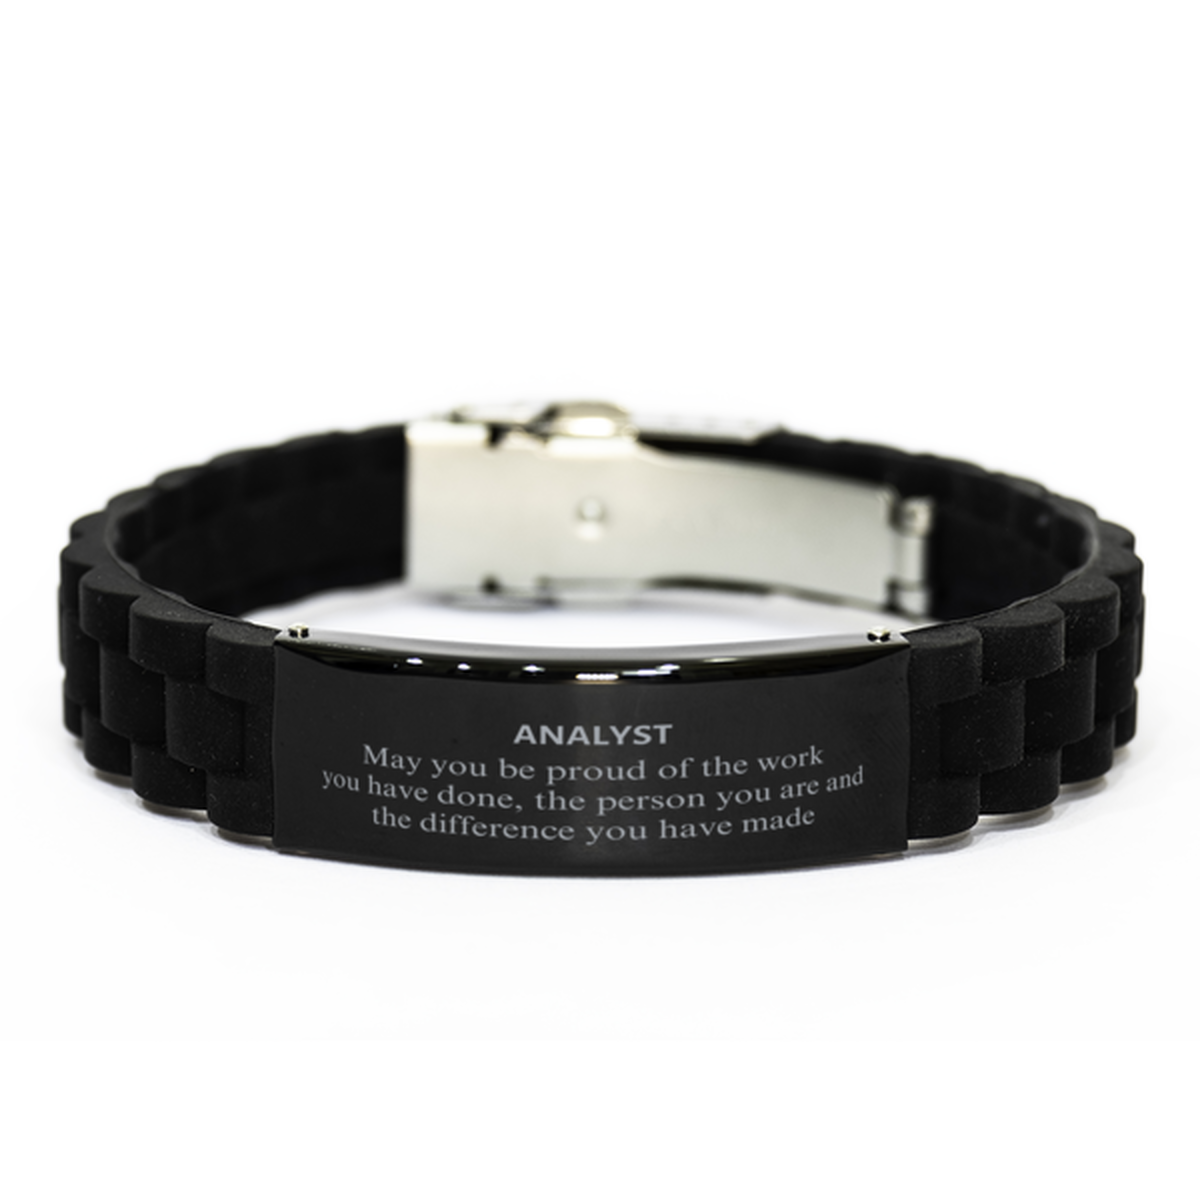 Analyst May you be proud of the work you have done, Retirement Analyst Black Glidelock Clasp Bracelet for Colleague Appreciation Gifts Amazing for Analyst